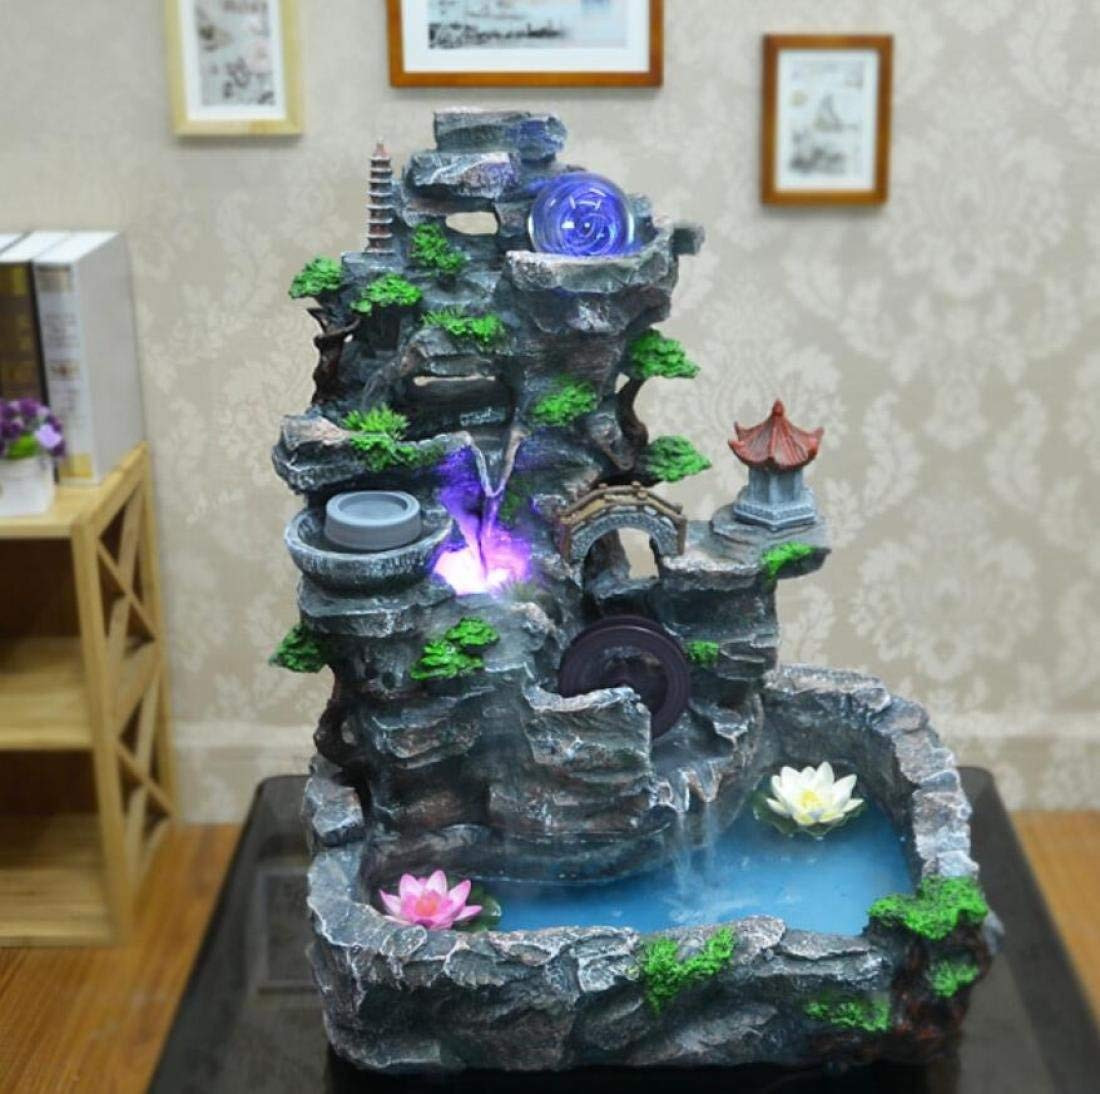 Large Vase Water Fountain Of Amazon Com Glg Large Resin Rockery Water Tabletop Scenes Floor Inside Amazon Com Glg Large Resin Rockery Water Tabletop Scenes Floor Standing Fountains Fish Tank Bonsai Home Office ornaments Humidifier Parts Indoor Tabletop